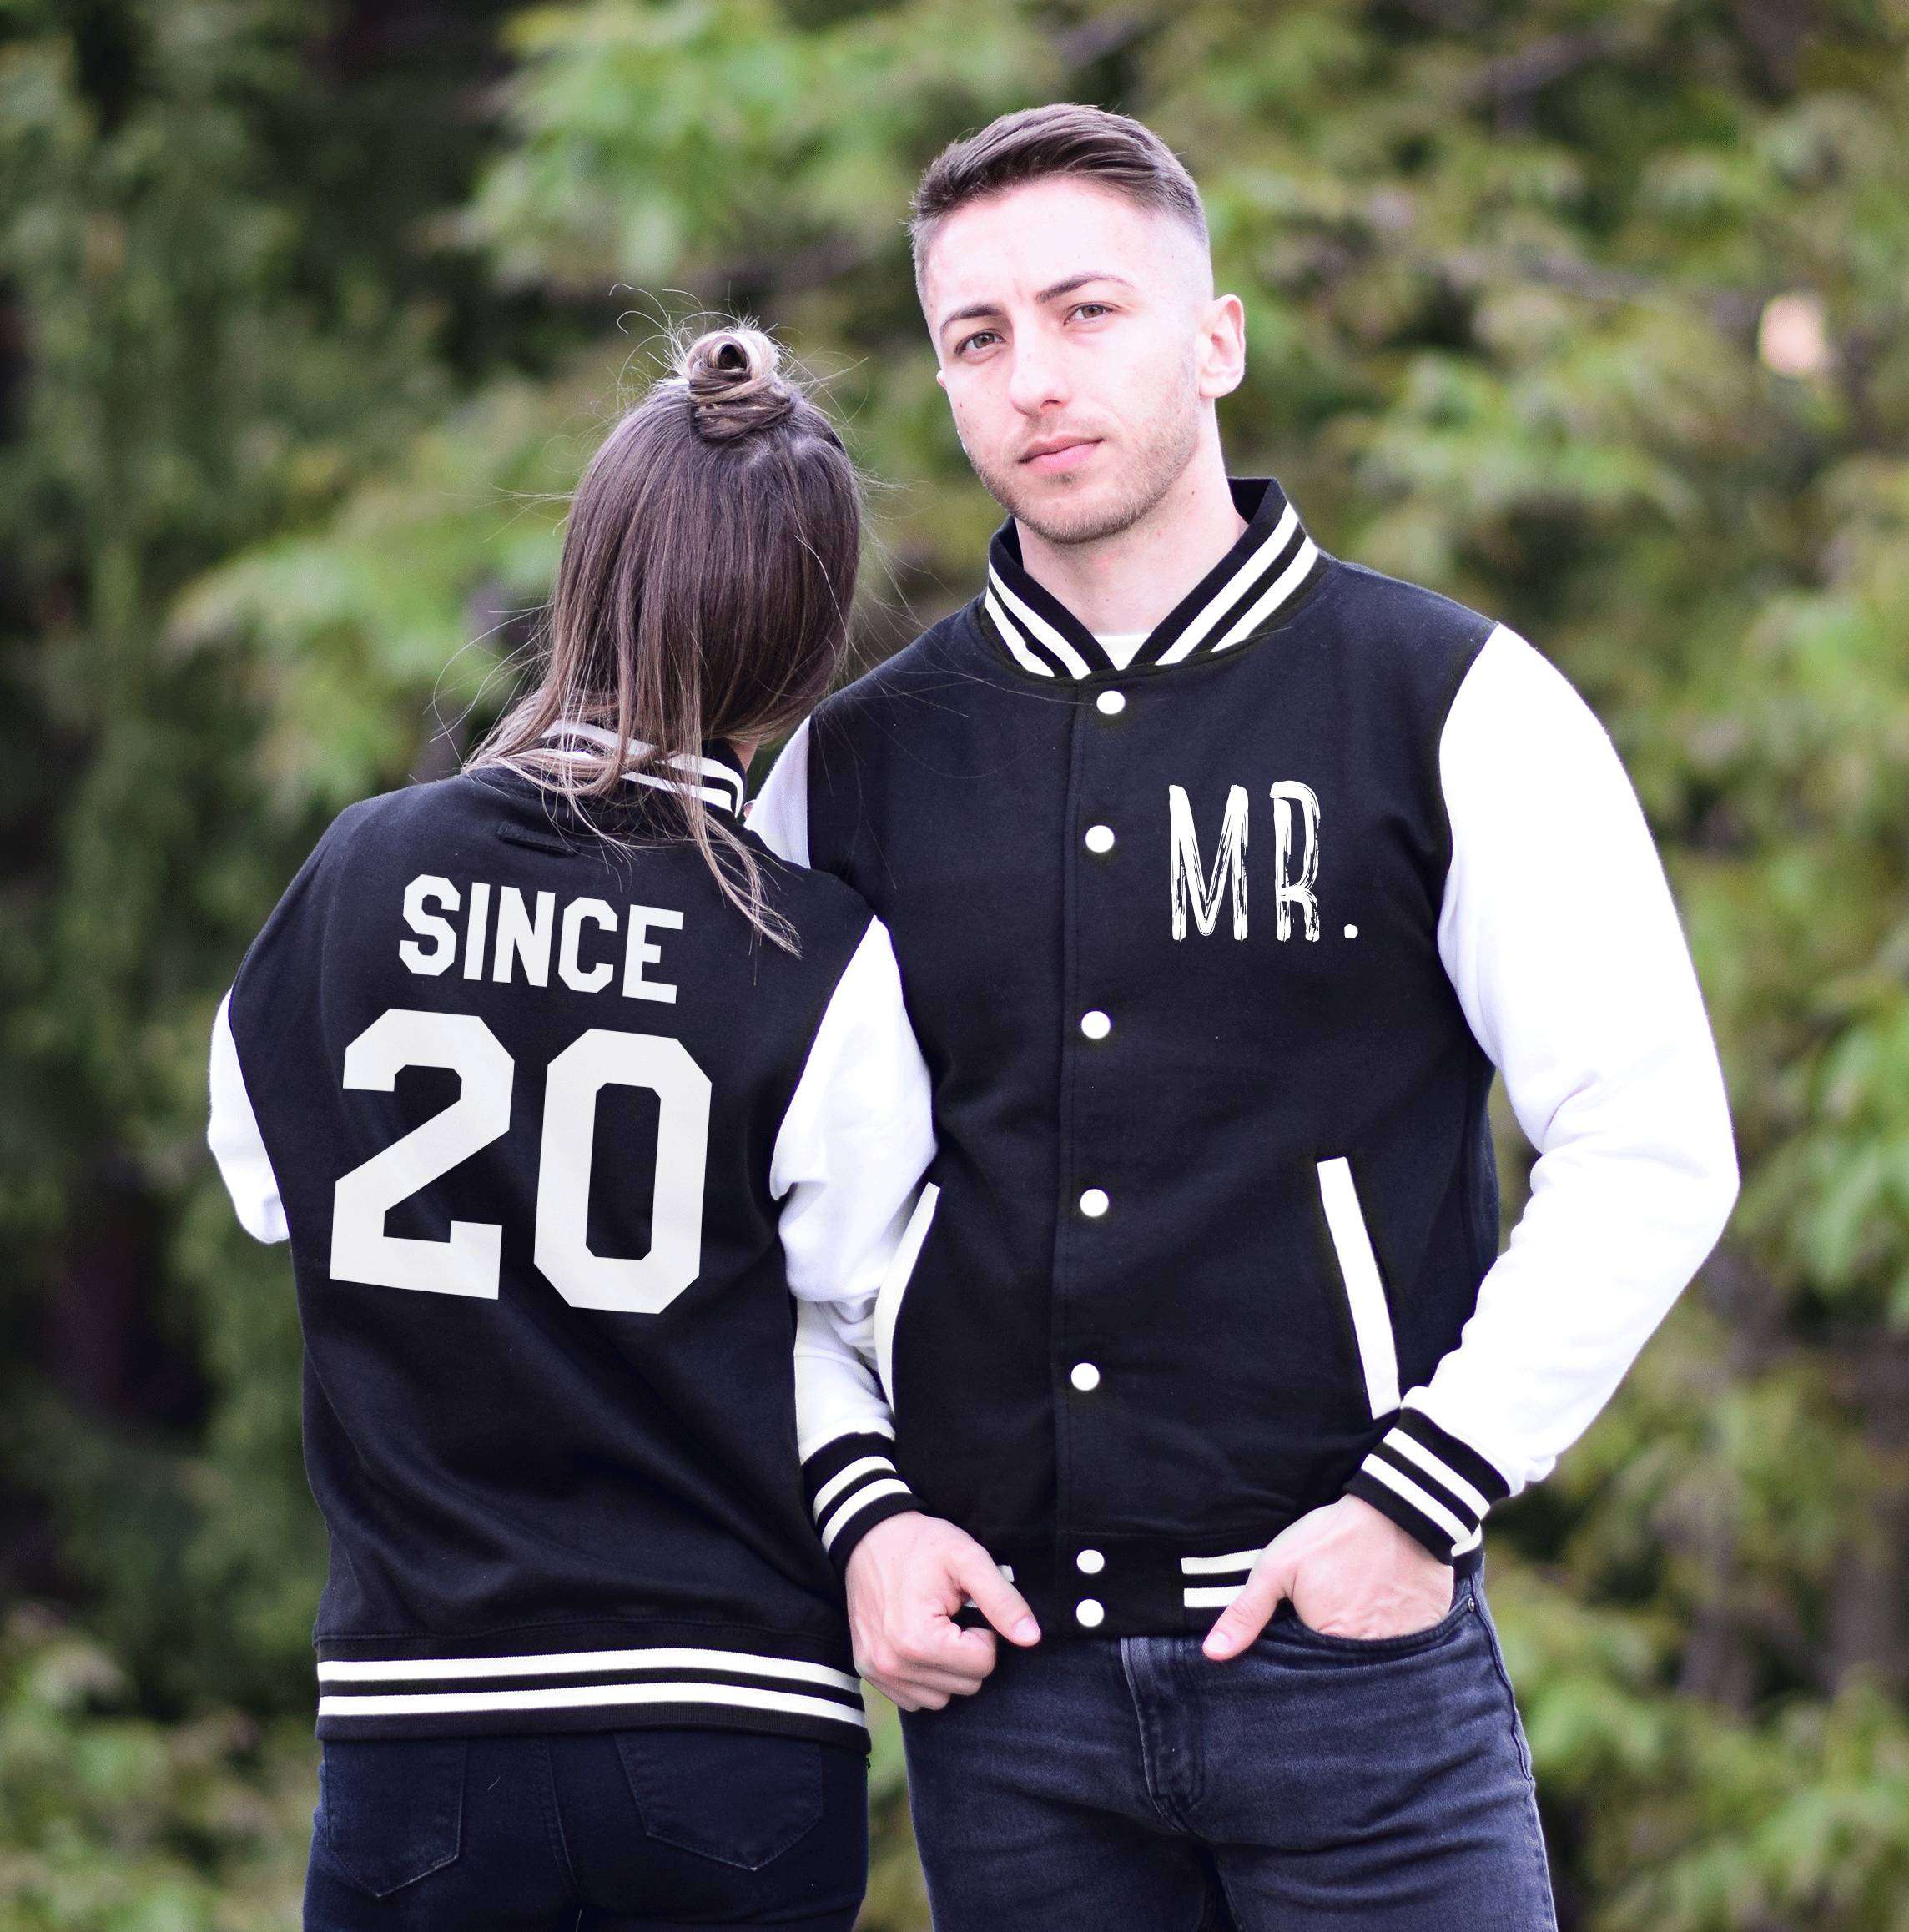 Family Varsity Jackets - Personalized Sibling Jackets - Custom Letterman Jackets for Family - Personalized Matching Sibling Jackets